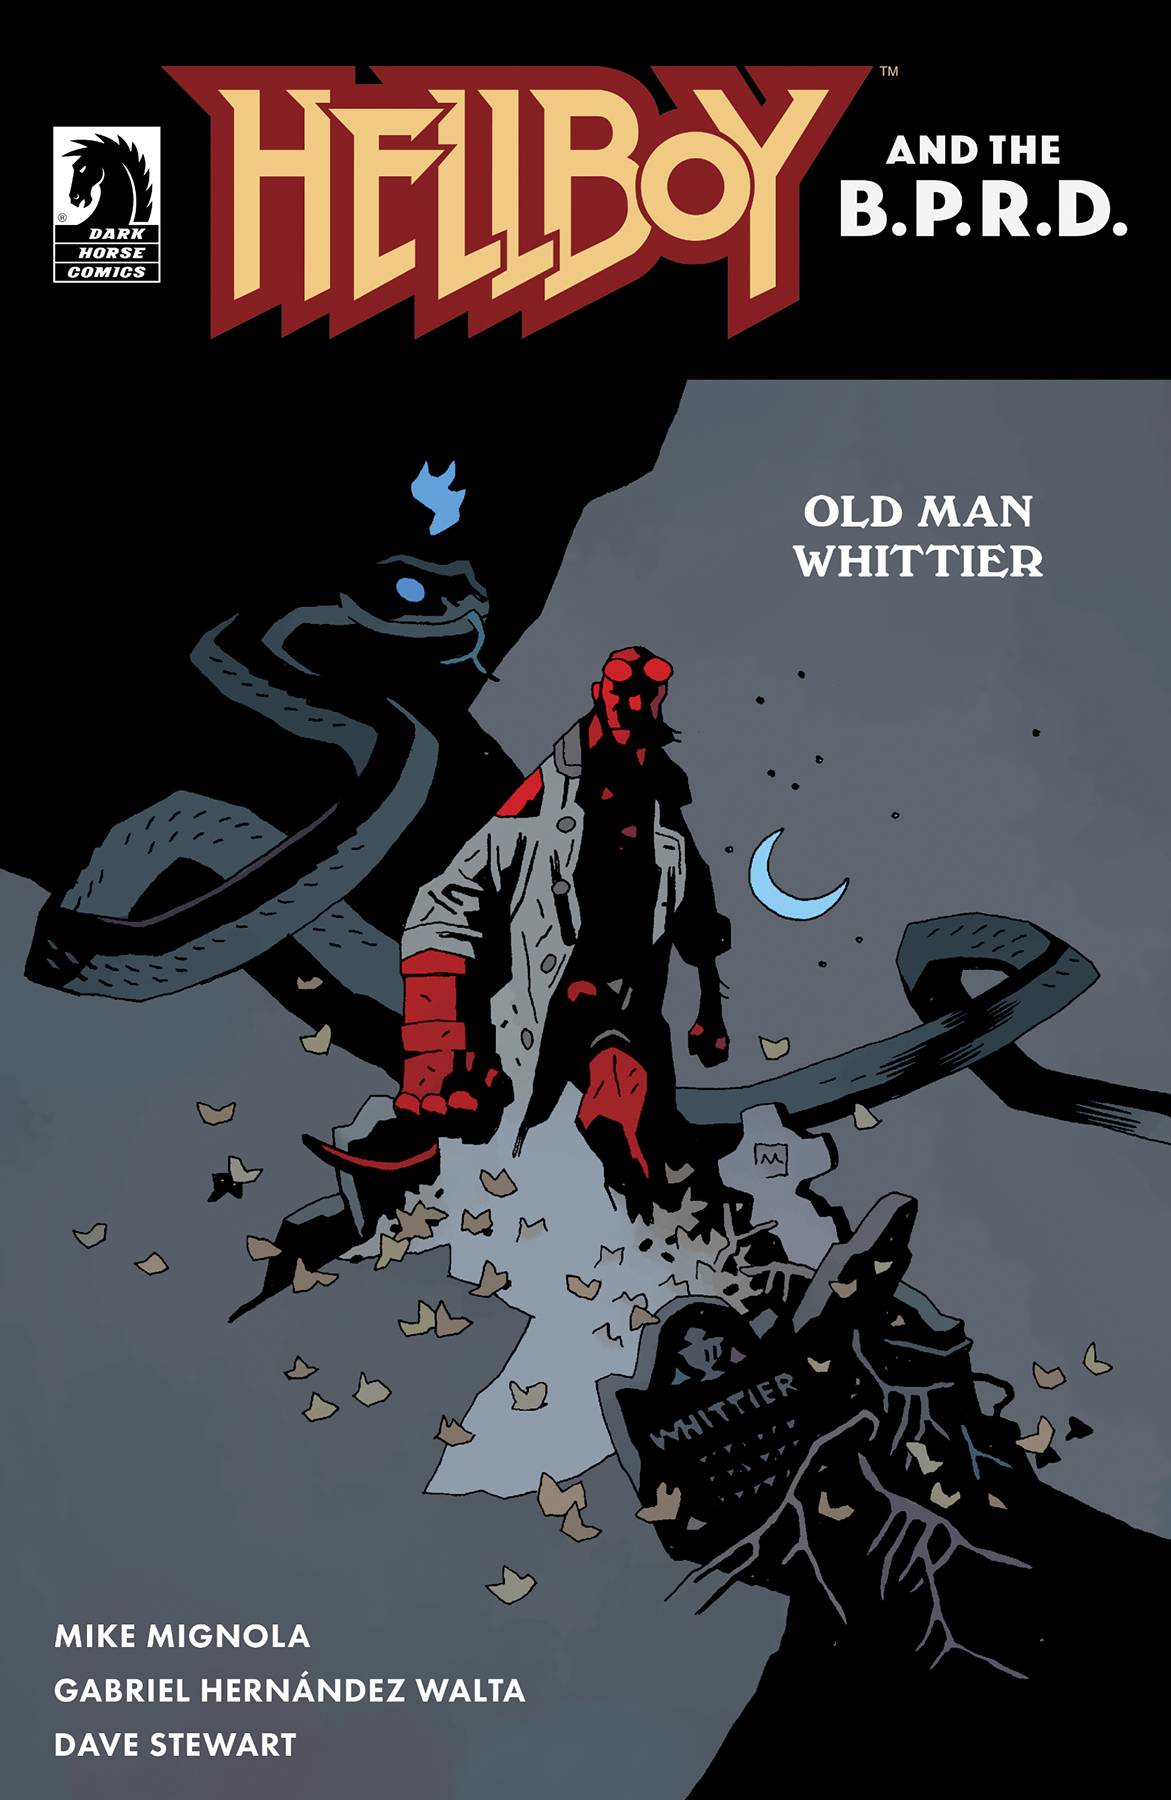 HELLBOY AND THE B.P.R.D (INGLES) OLD MAN WHITTIER (B)